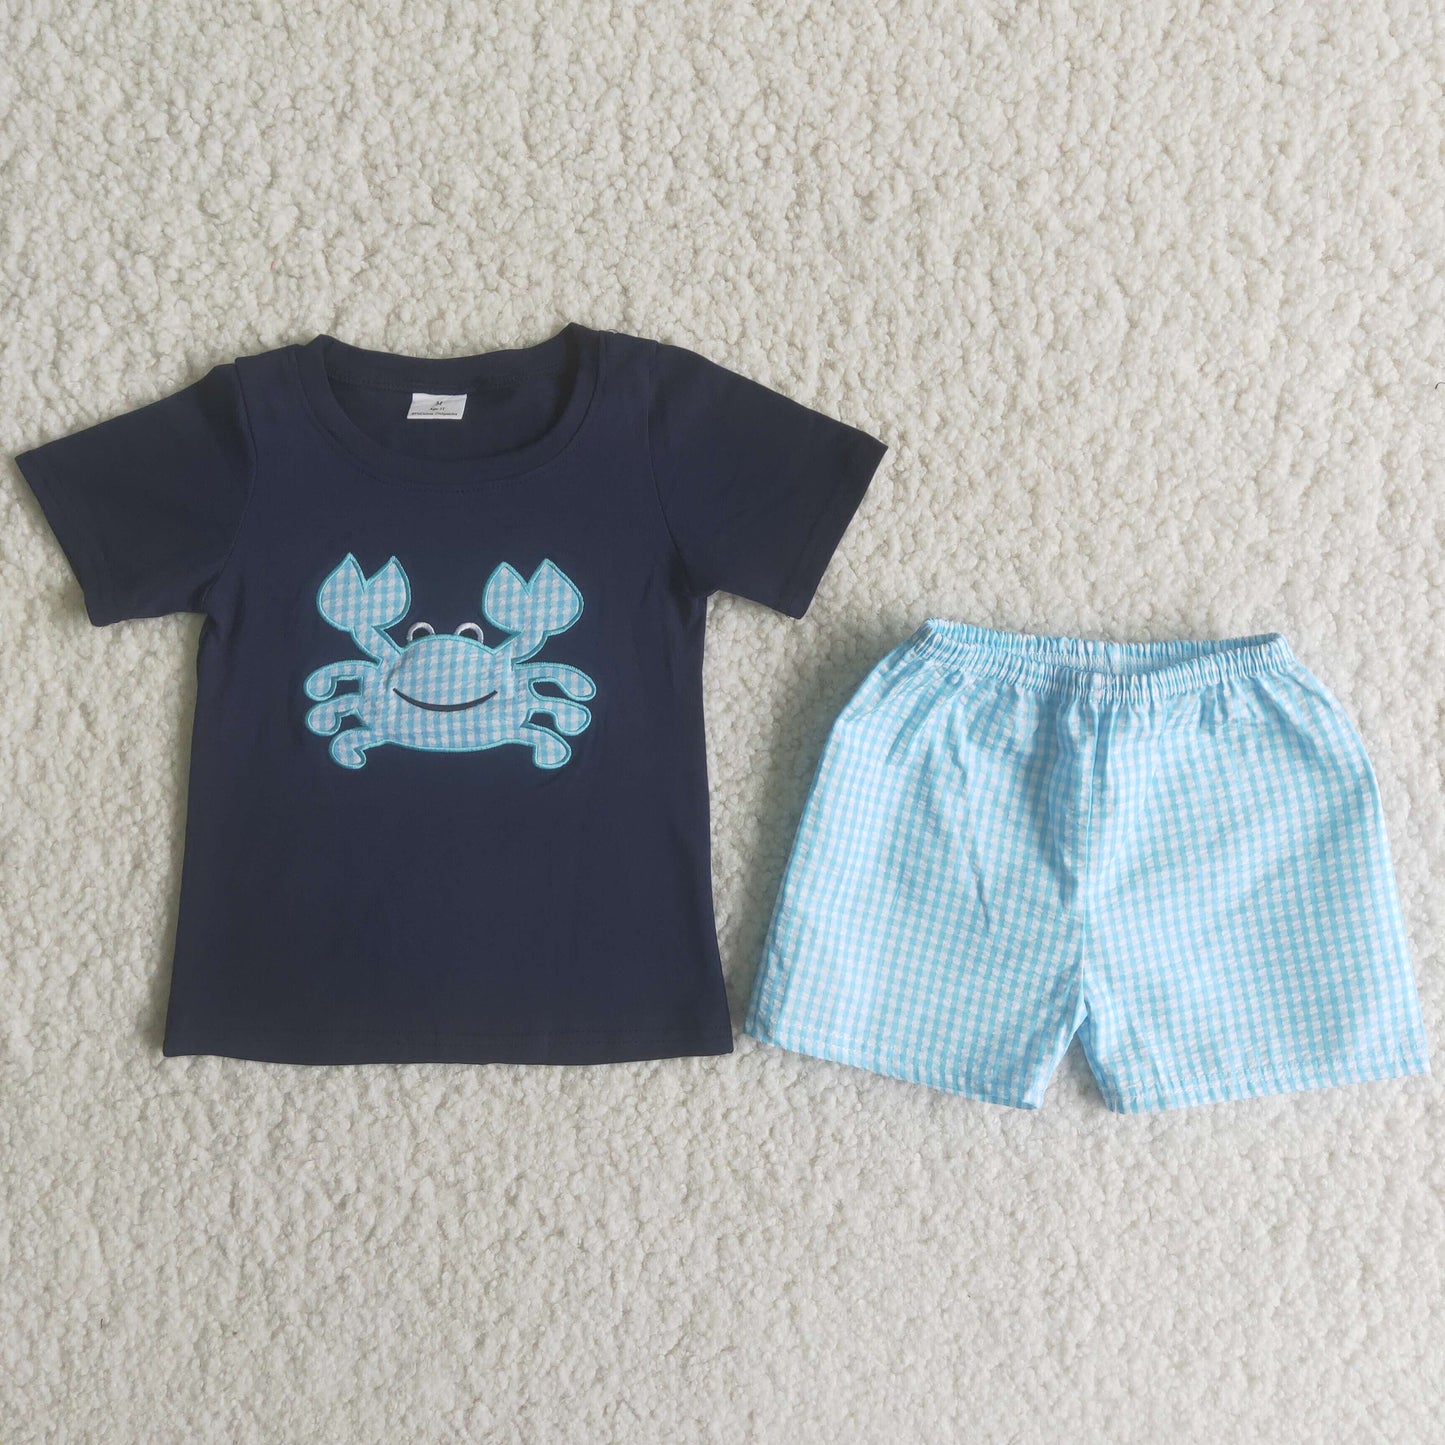 Embroidered Crab Boy's Summer Outfit